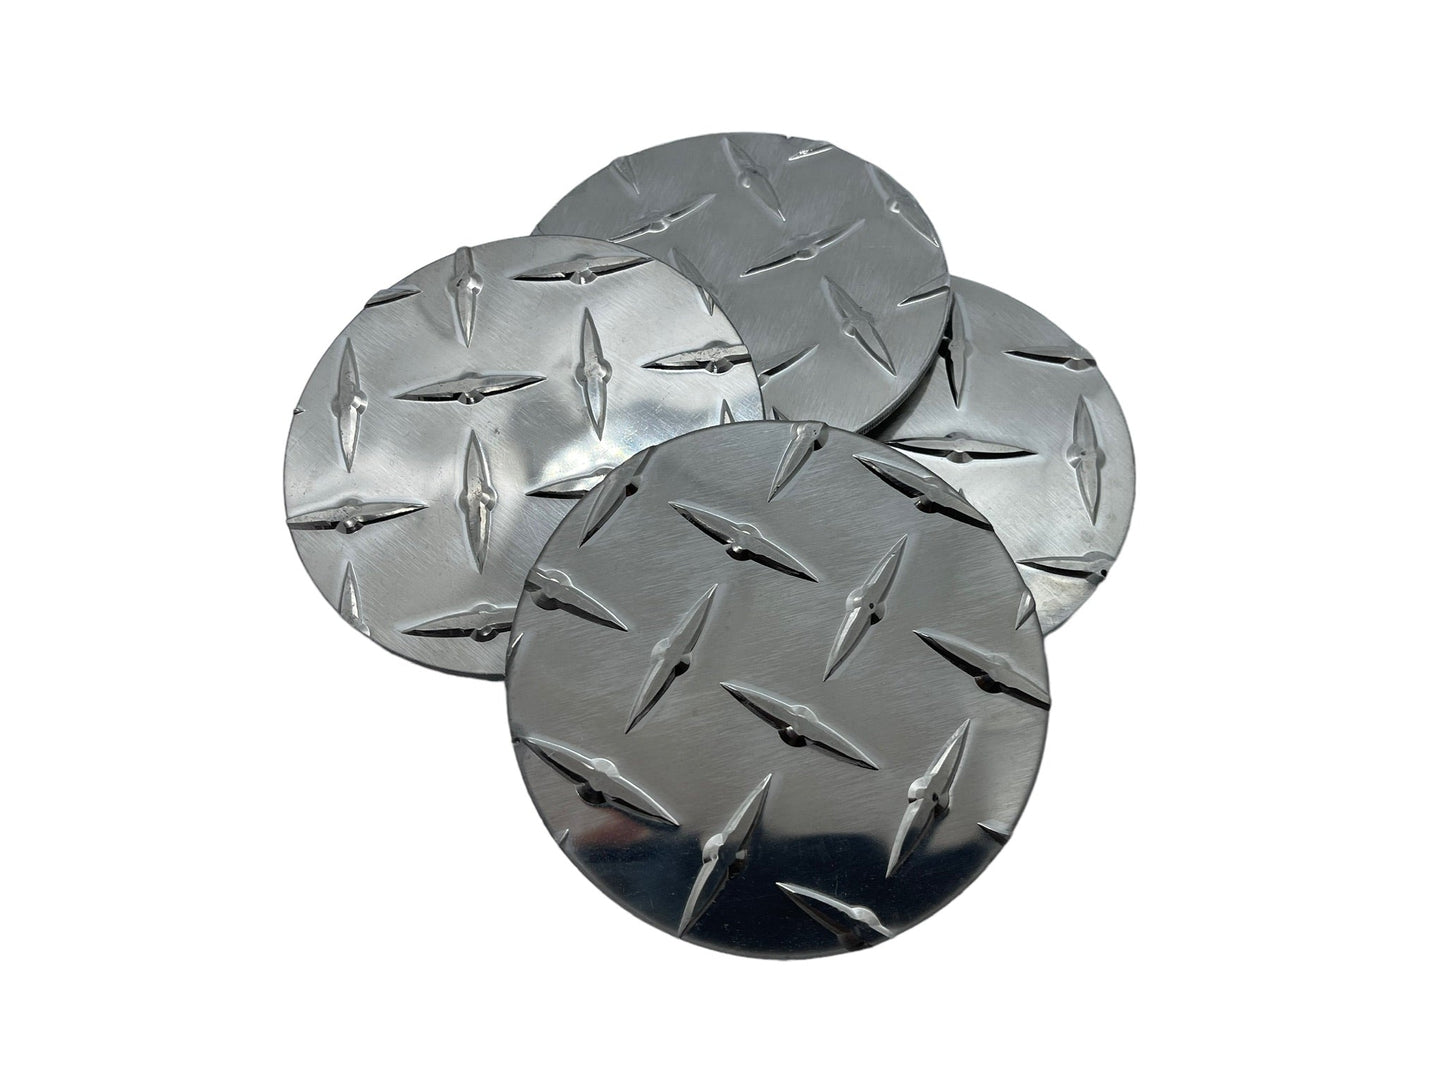 4 Inch Diamond Plate Coasters with Smooth Tumbled Edges - Made in USA